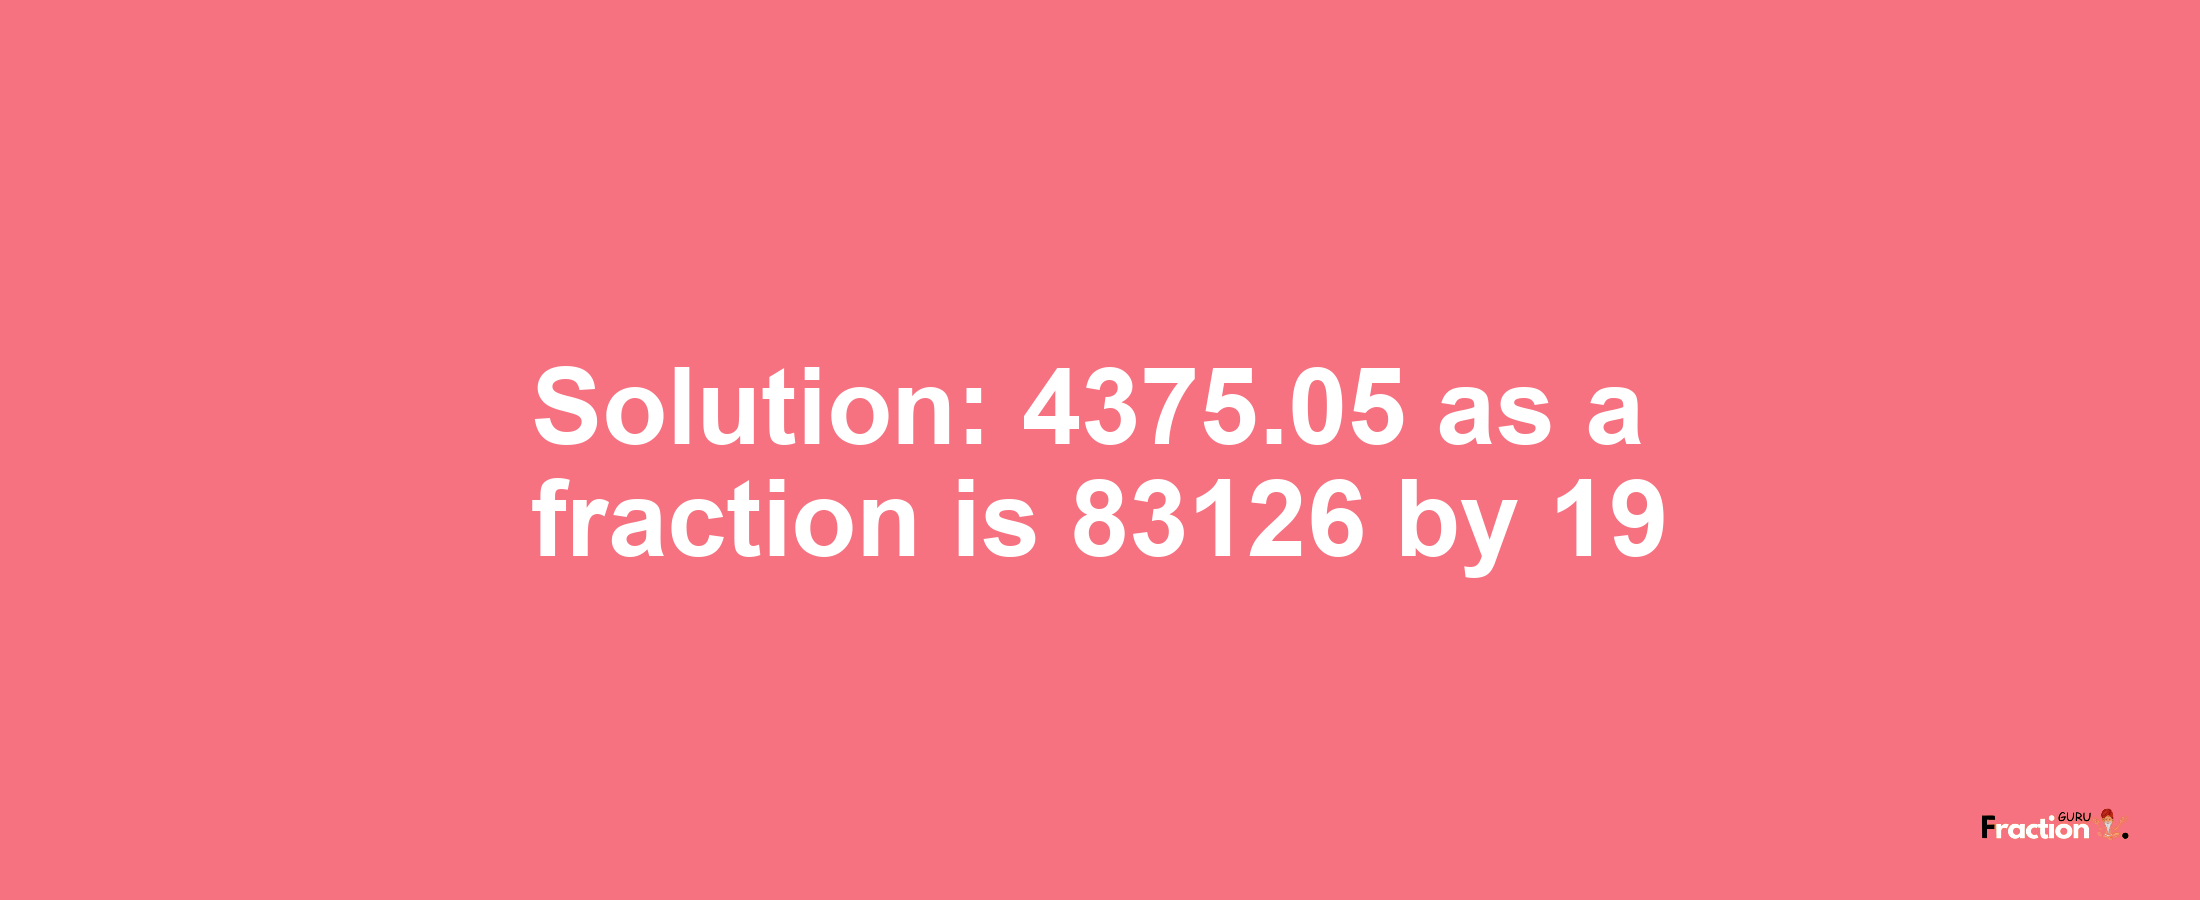 Solution:4375.05 as a fraction is 83126/19